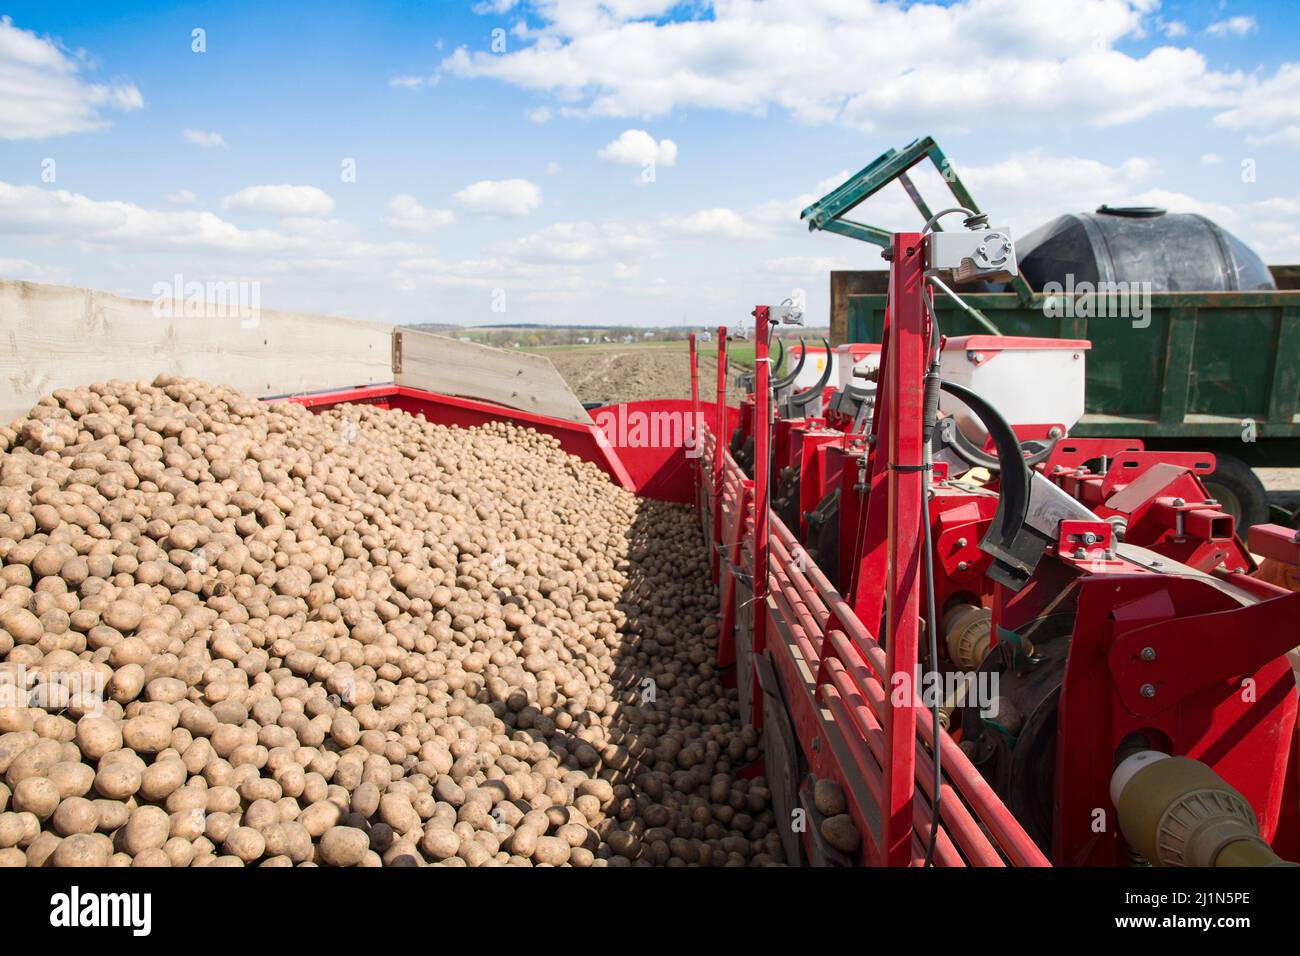 A tractor planting a potato crop on the prairies Stock Photo